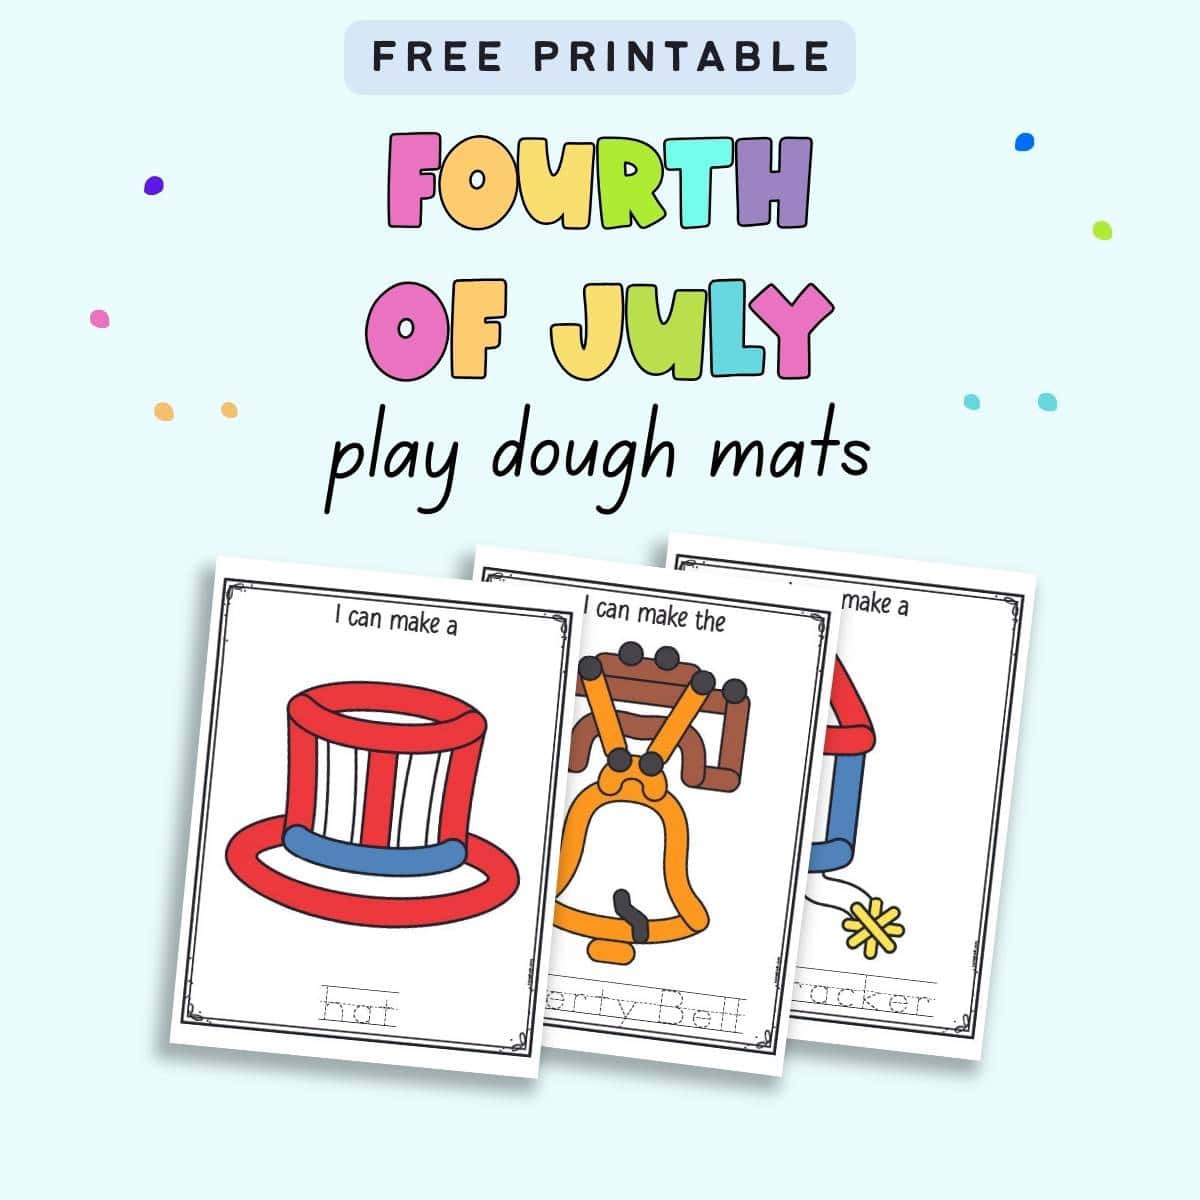 Text "free printable Fourth of July play dough mats" with a preview of three Independence Day themed play dough mats.